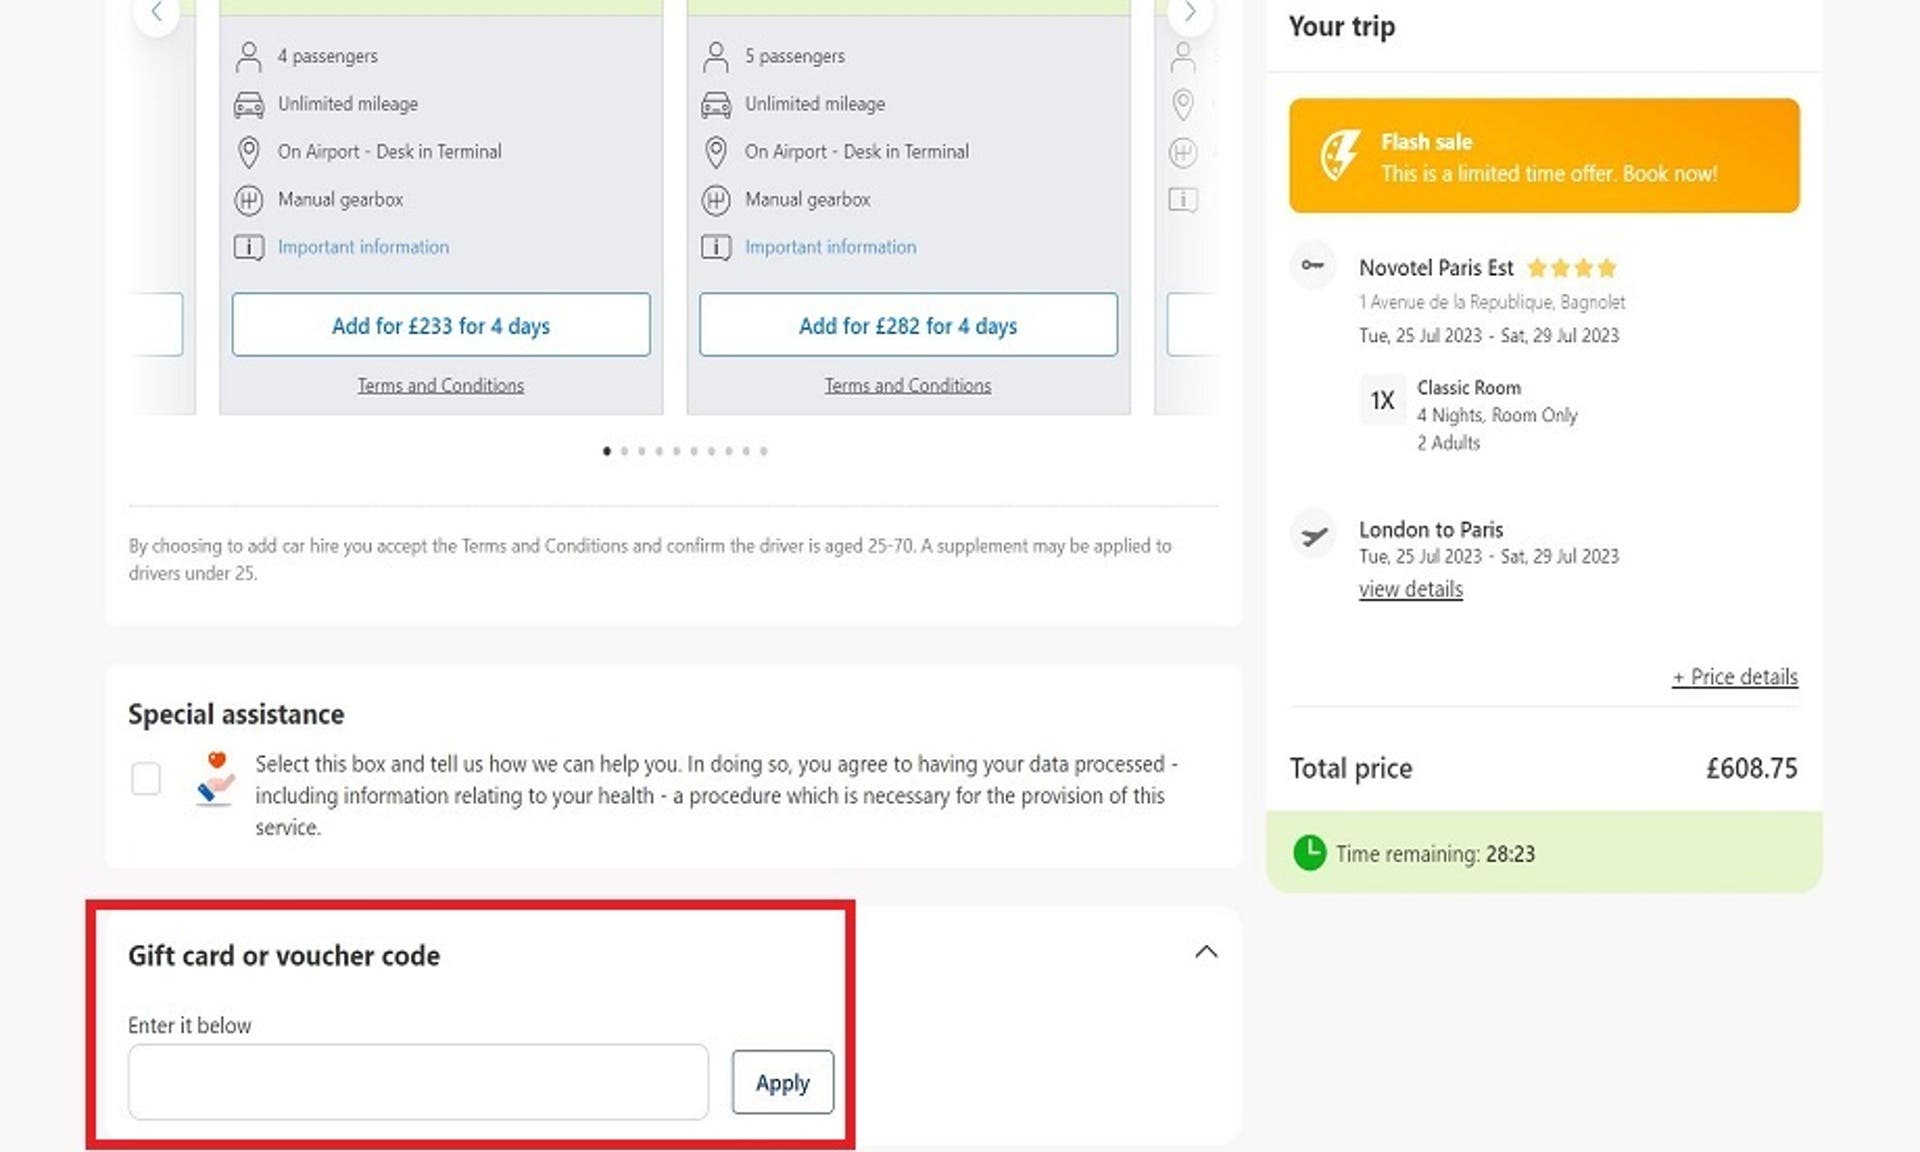  A screenshot of the Booking.com website showing users how to use their promo code with the 'Gift card or voucher code' highlighted. 